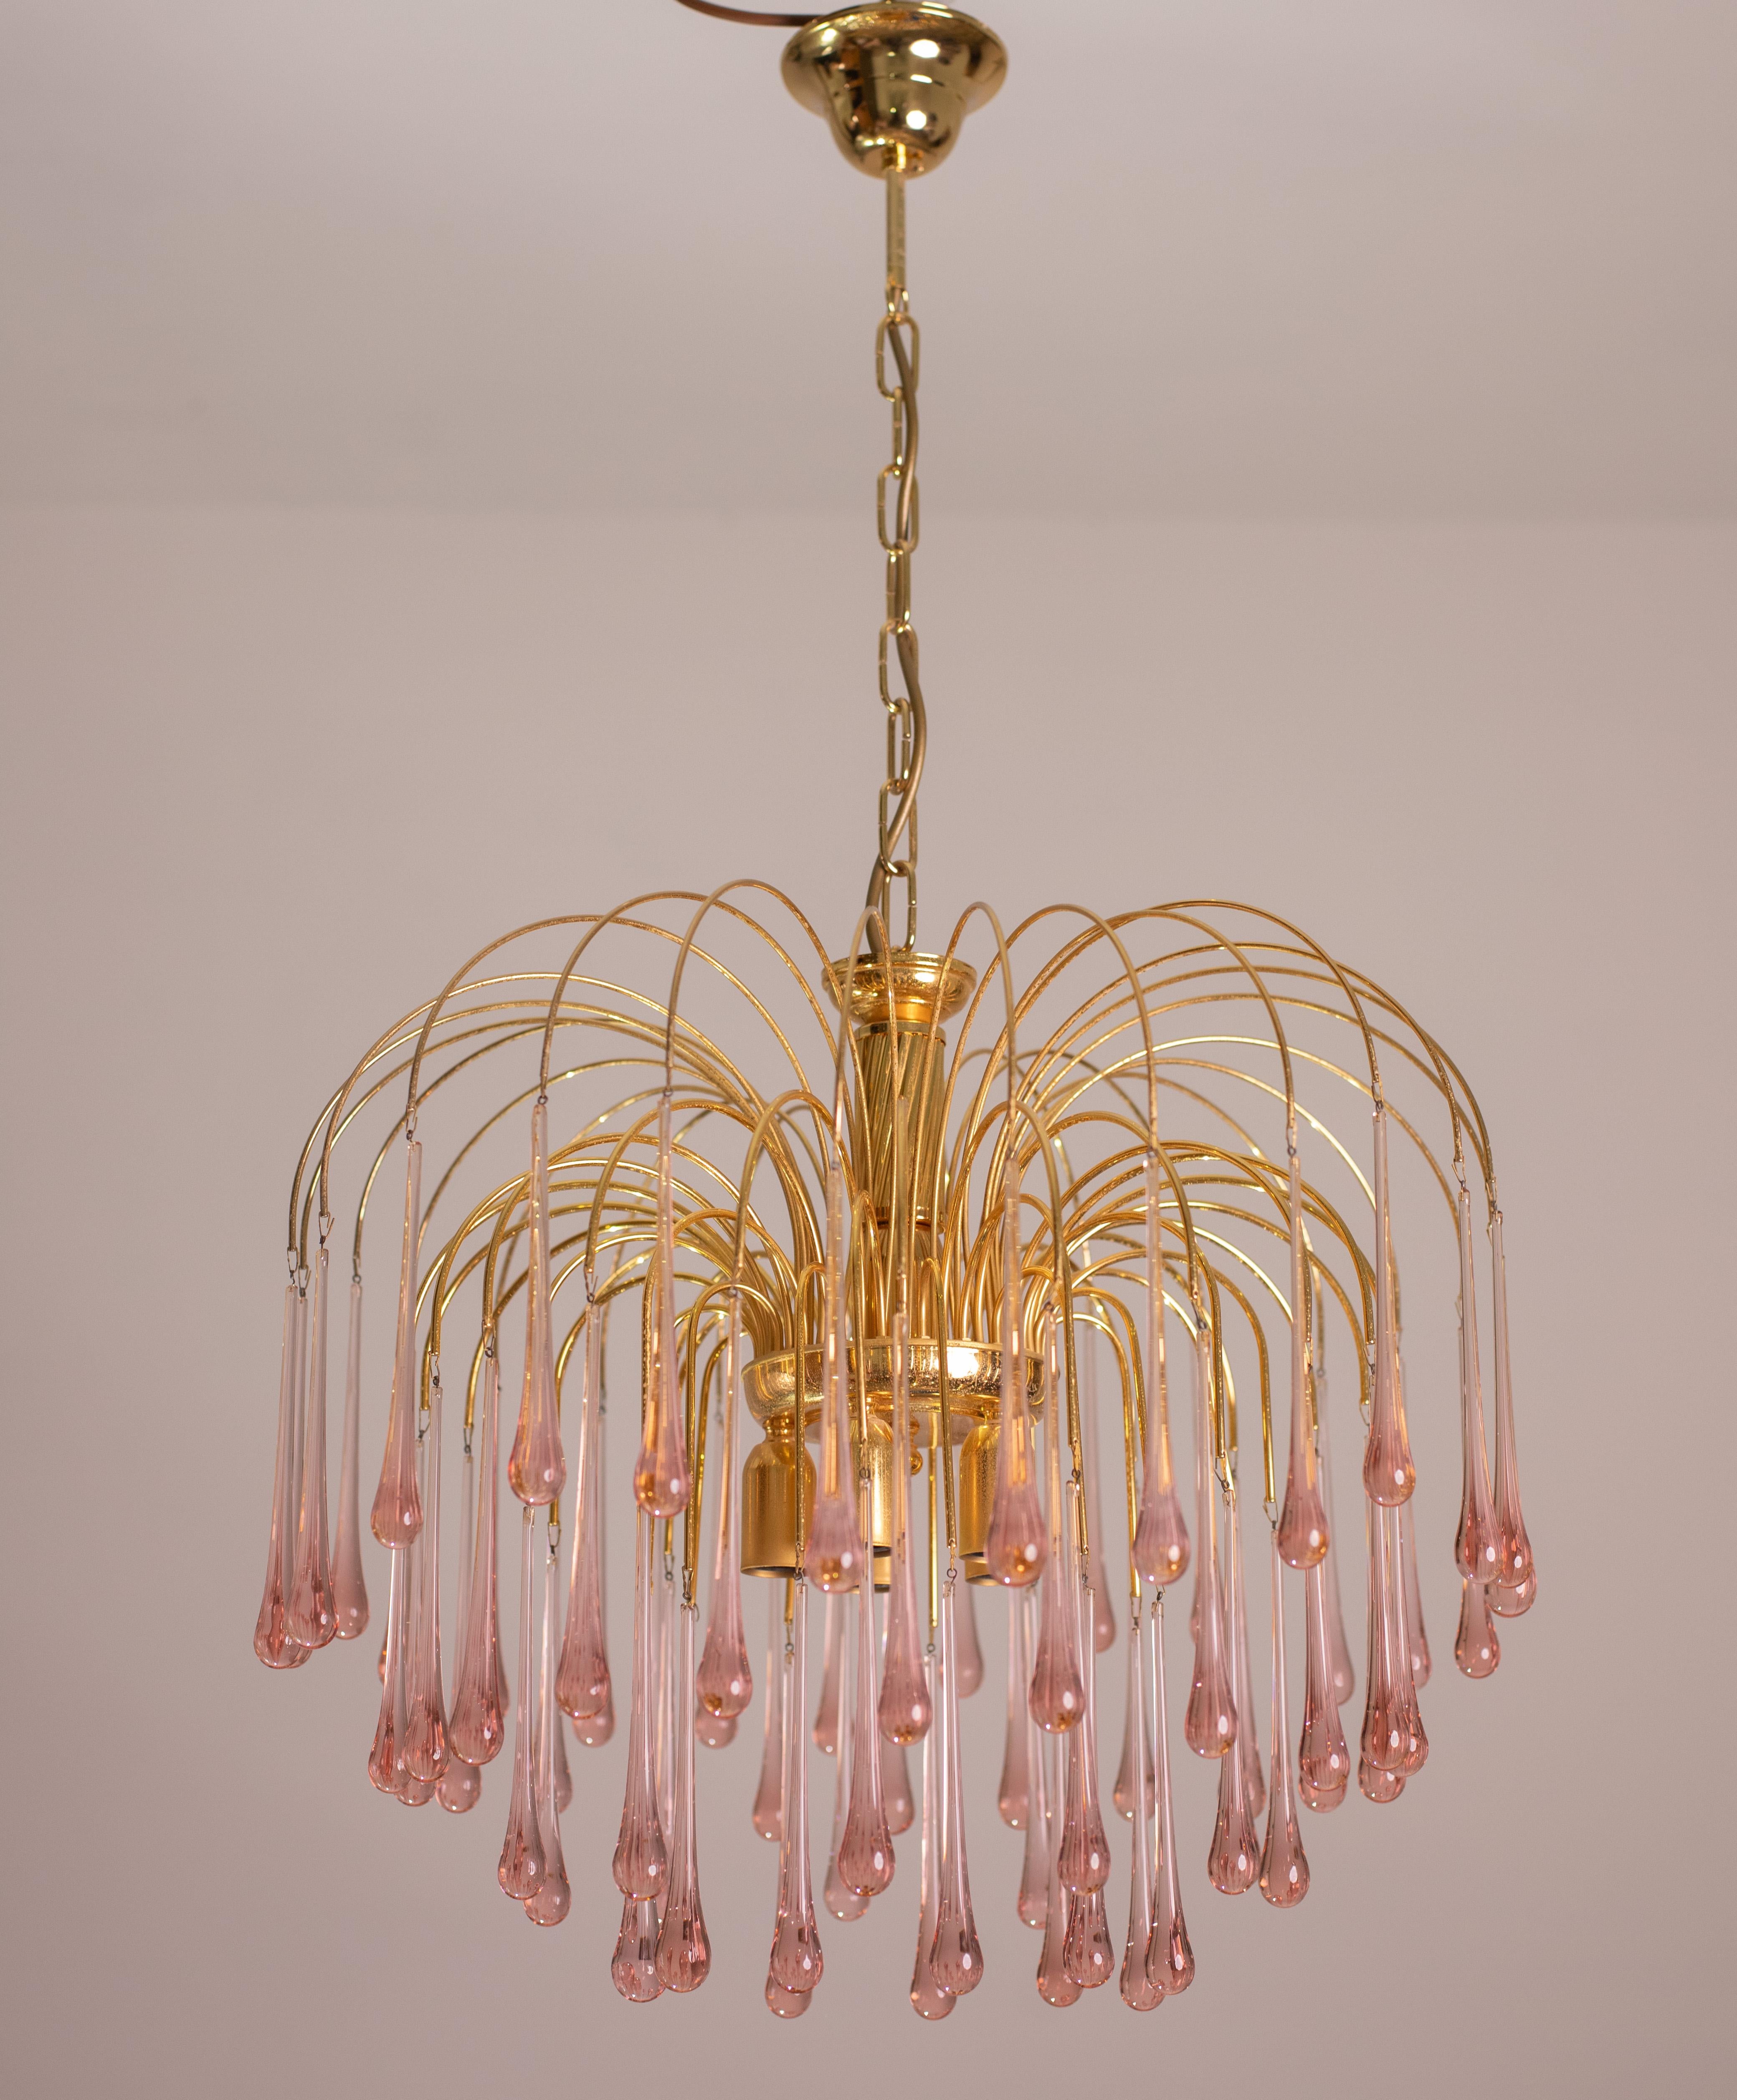 Stunning Murano chandelier in the style of Venini La Cascata.
The chandelier consists of three laps made up of beautiful transparent pink drops cascading down.
The chandelier consists of 5 e14 light points, the structure is in gold bath, in perfect